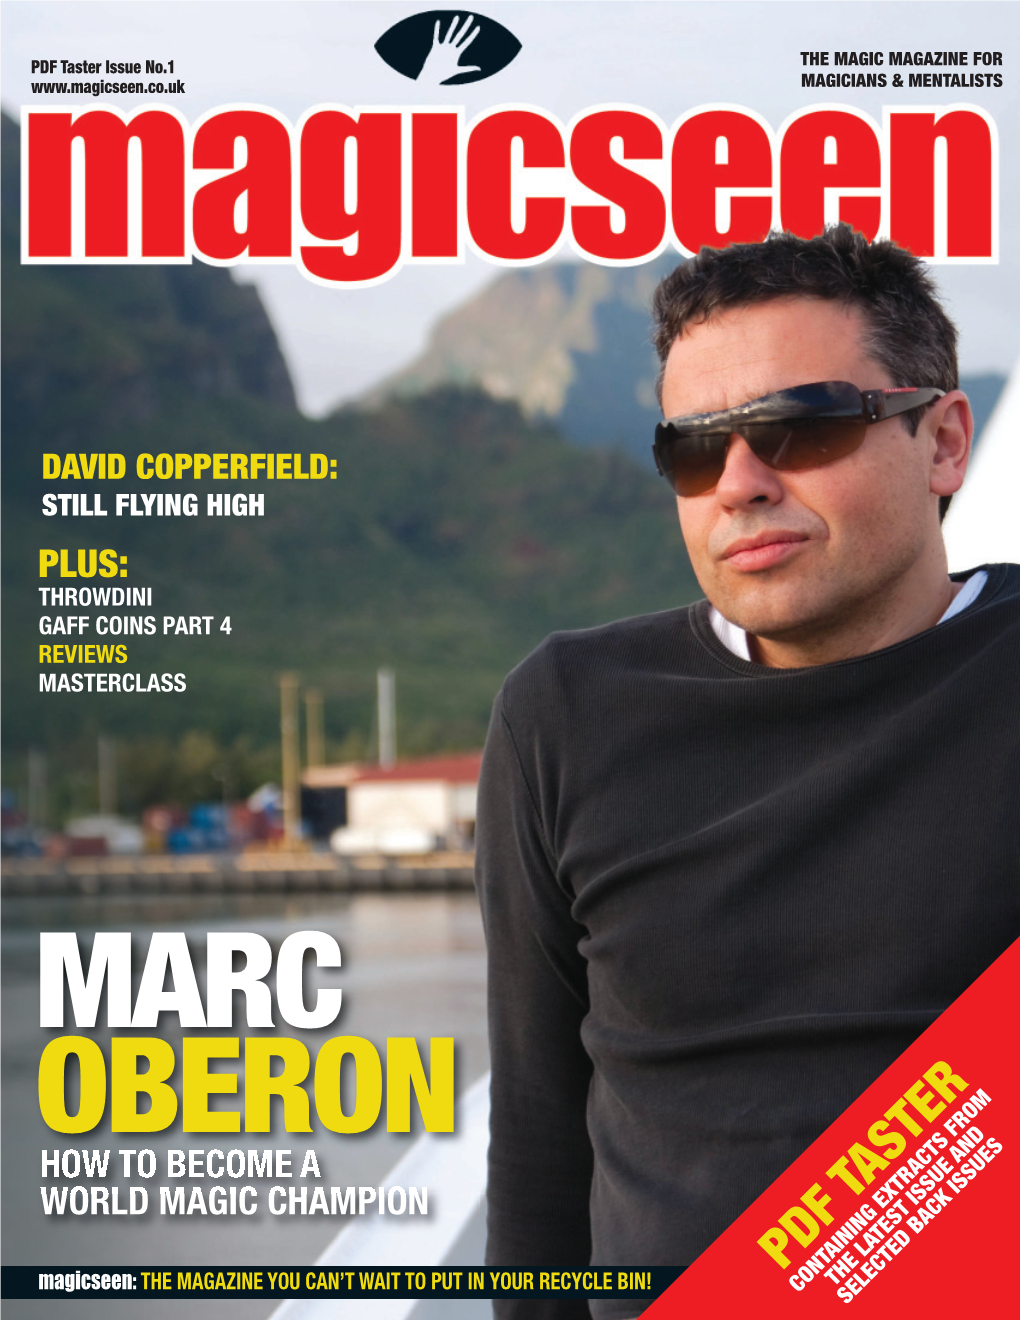 PDF Taster Issue No.1 the MAGIC MAGAZINE for MAGICIANS & MENTALISTS